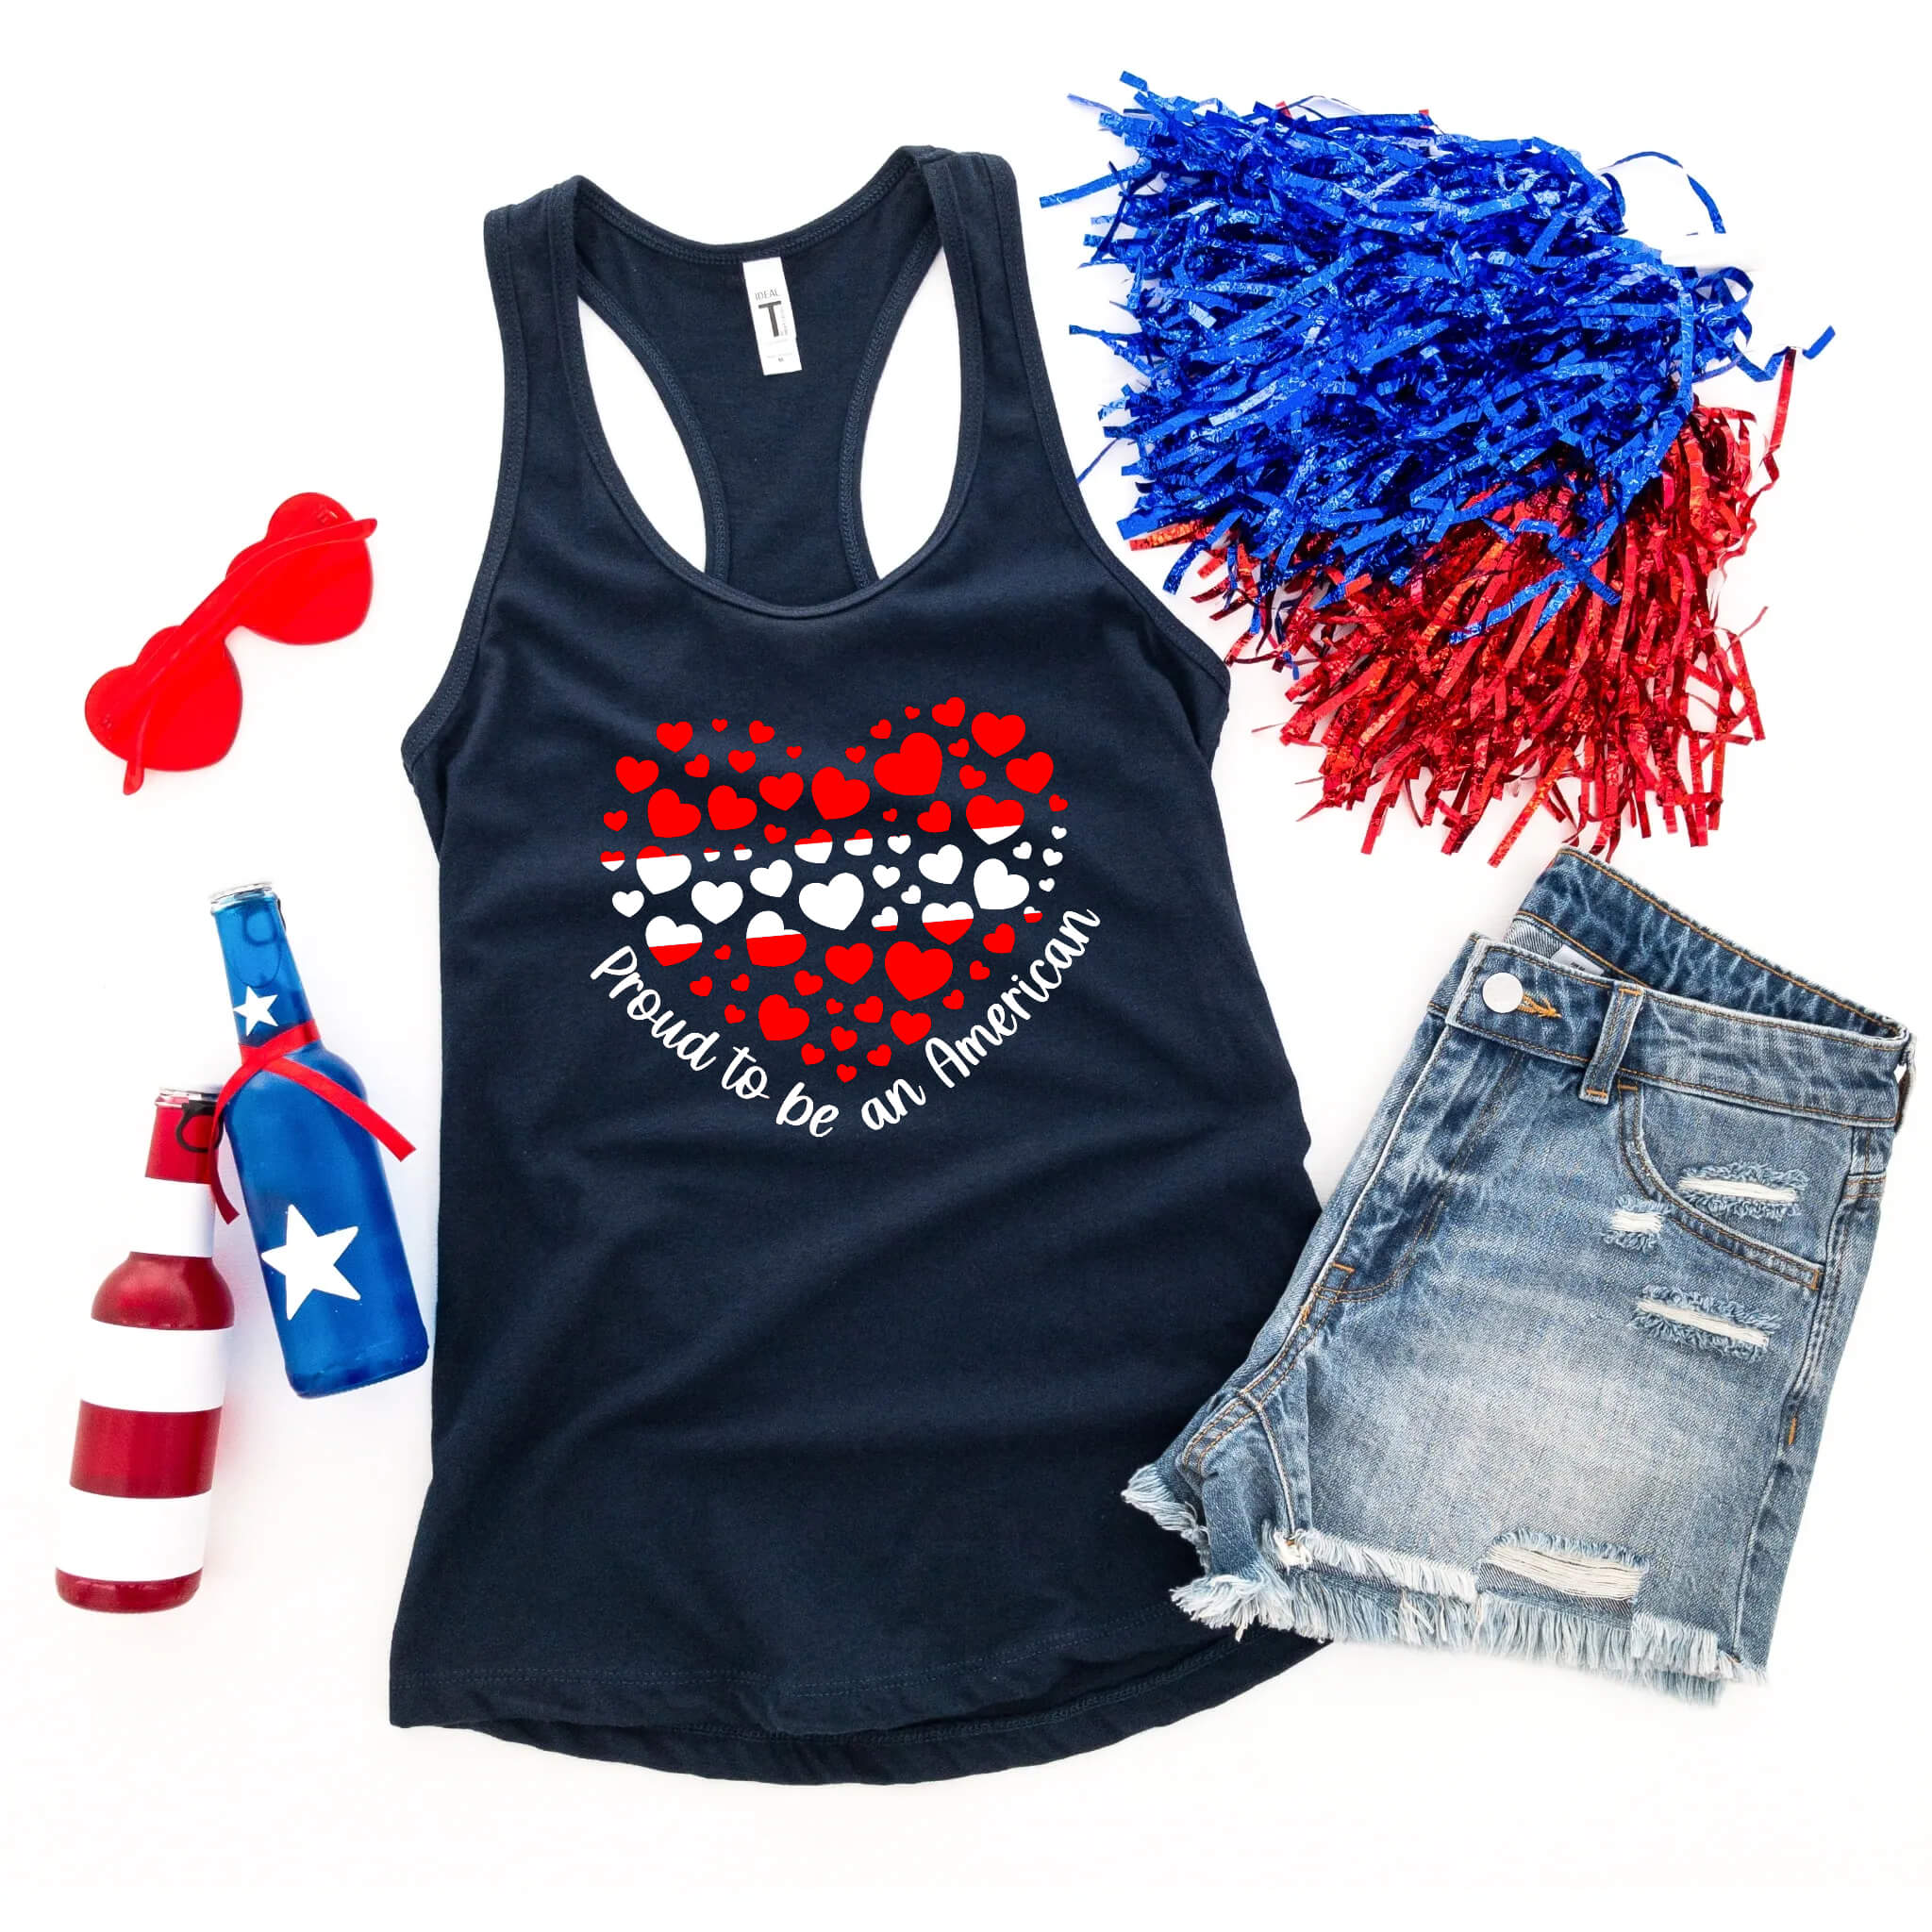 4th of July - Proud To Be American Patriotic Women’s Graphic Print T-Shirt / Tank Top